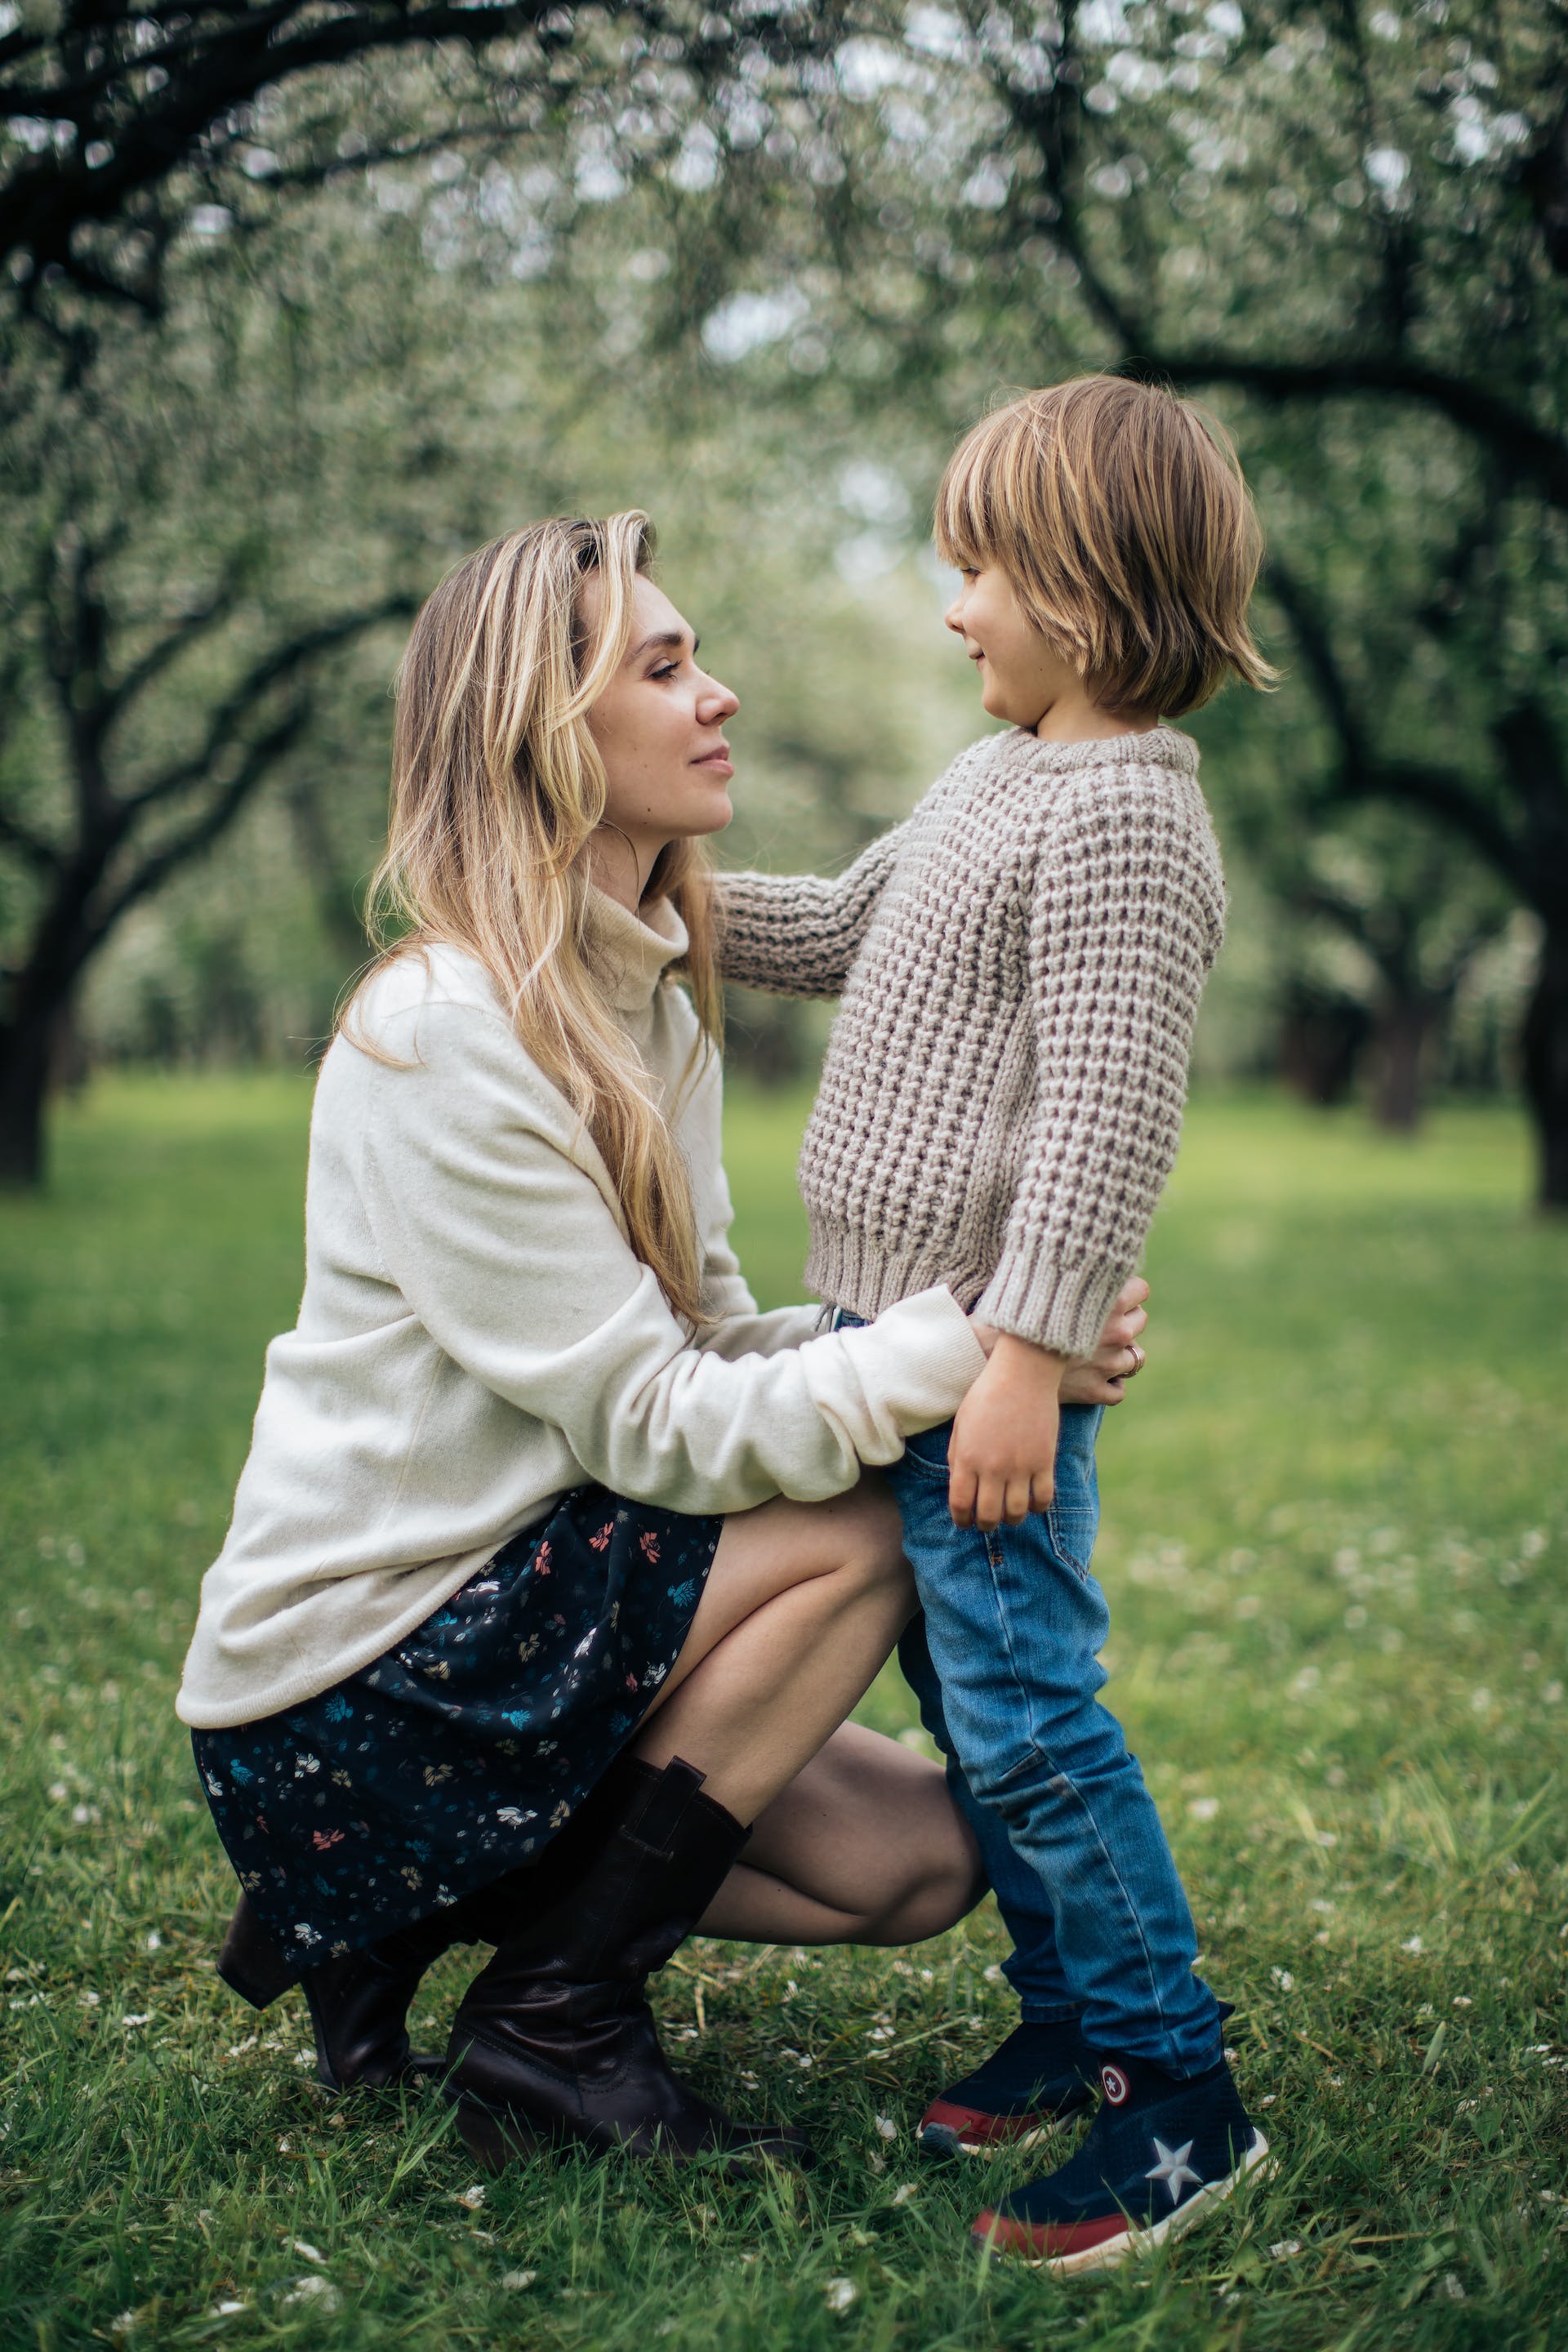 A mother and child standing on a grassy field while looking at each other | Source: Pexels